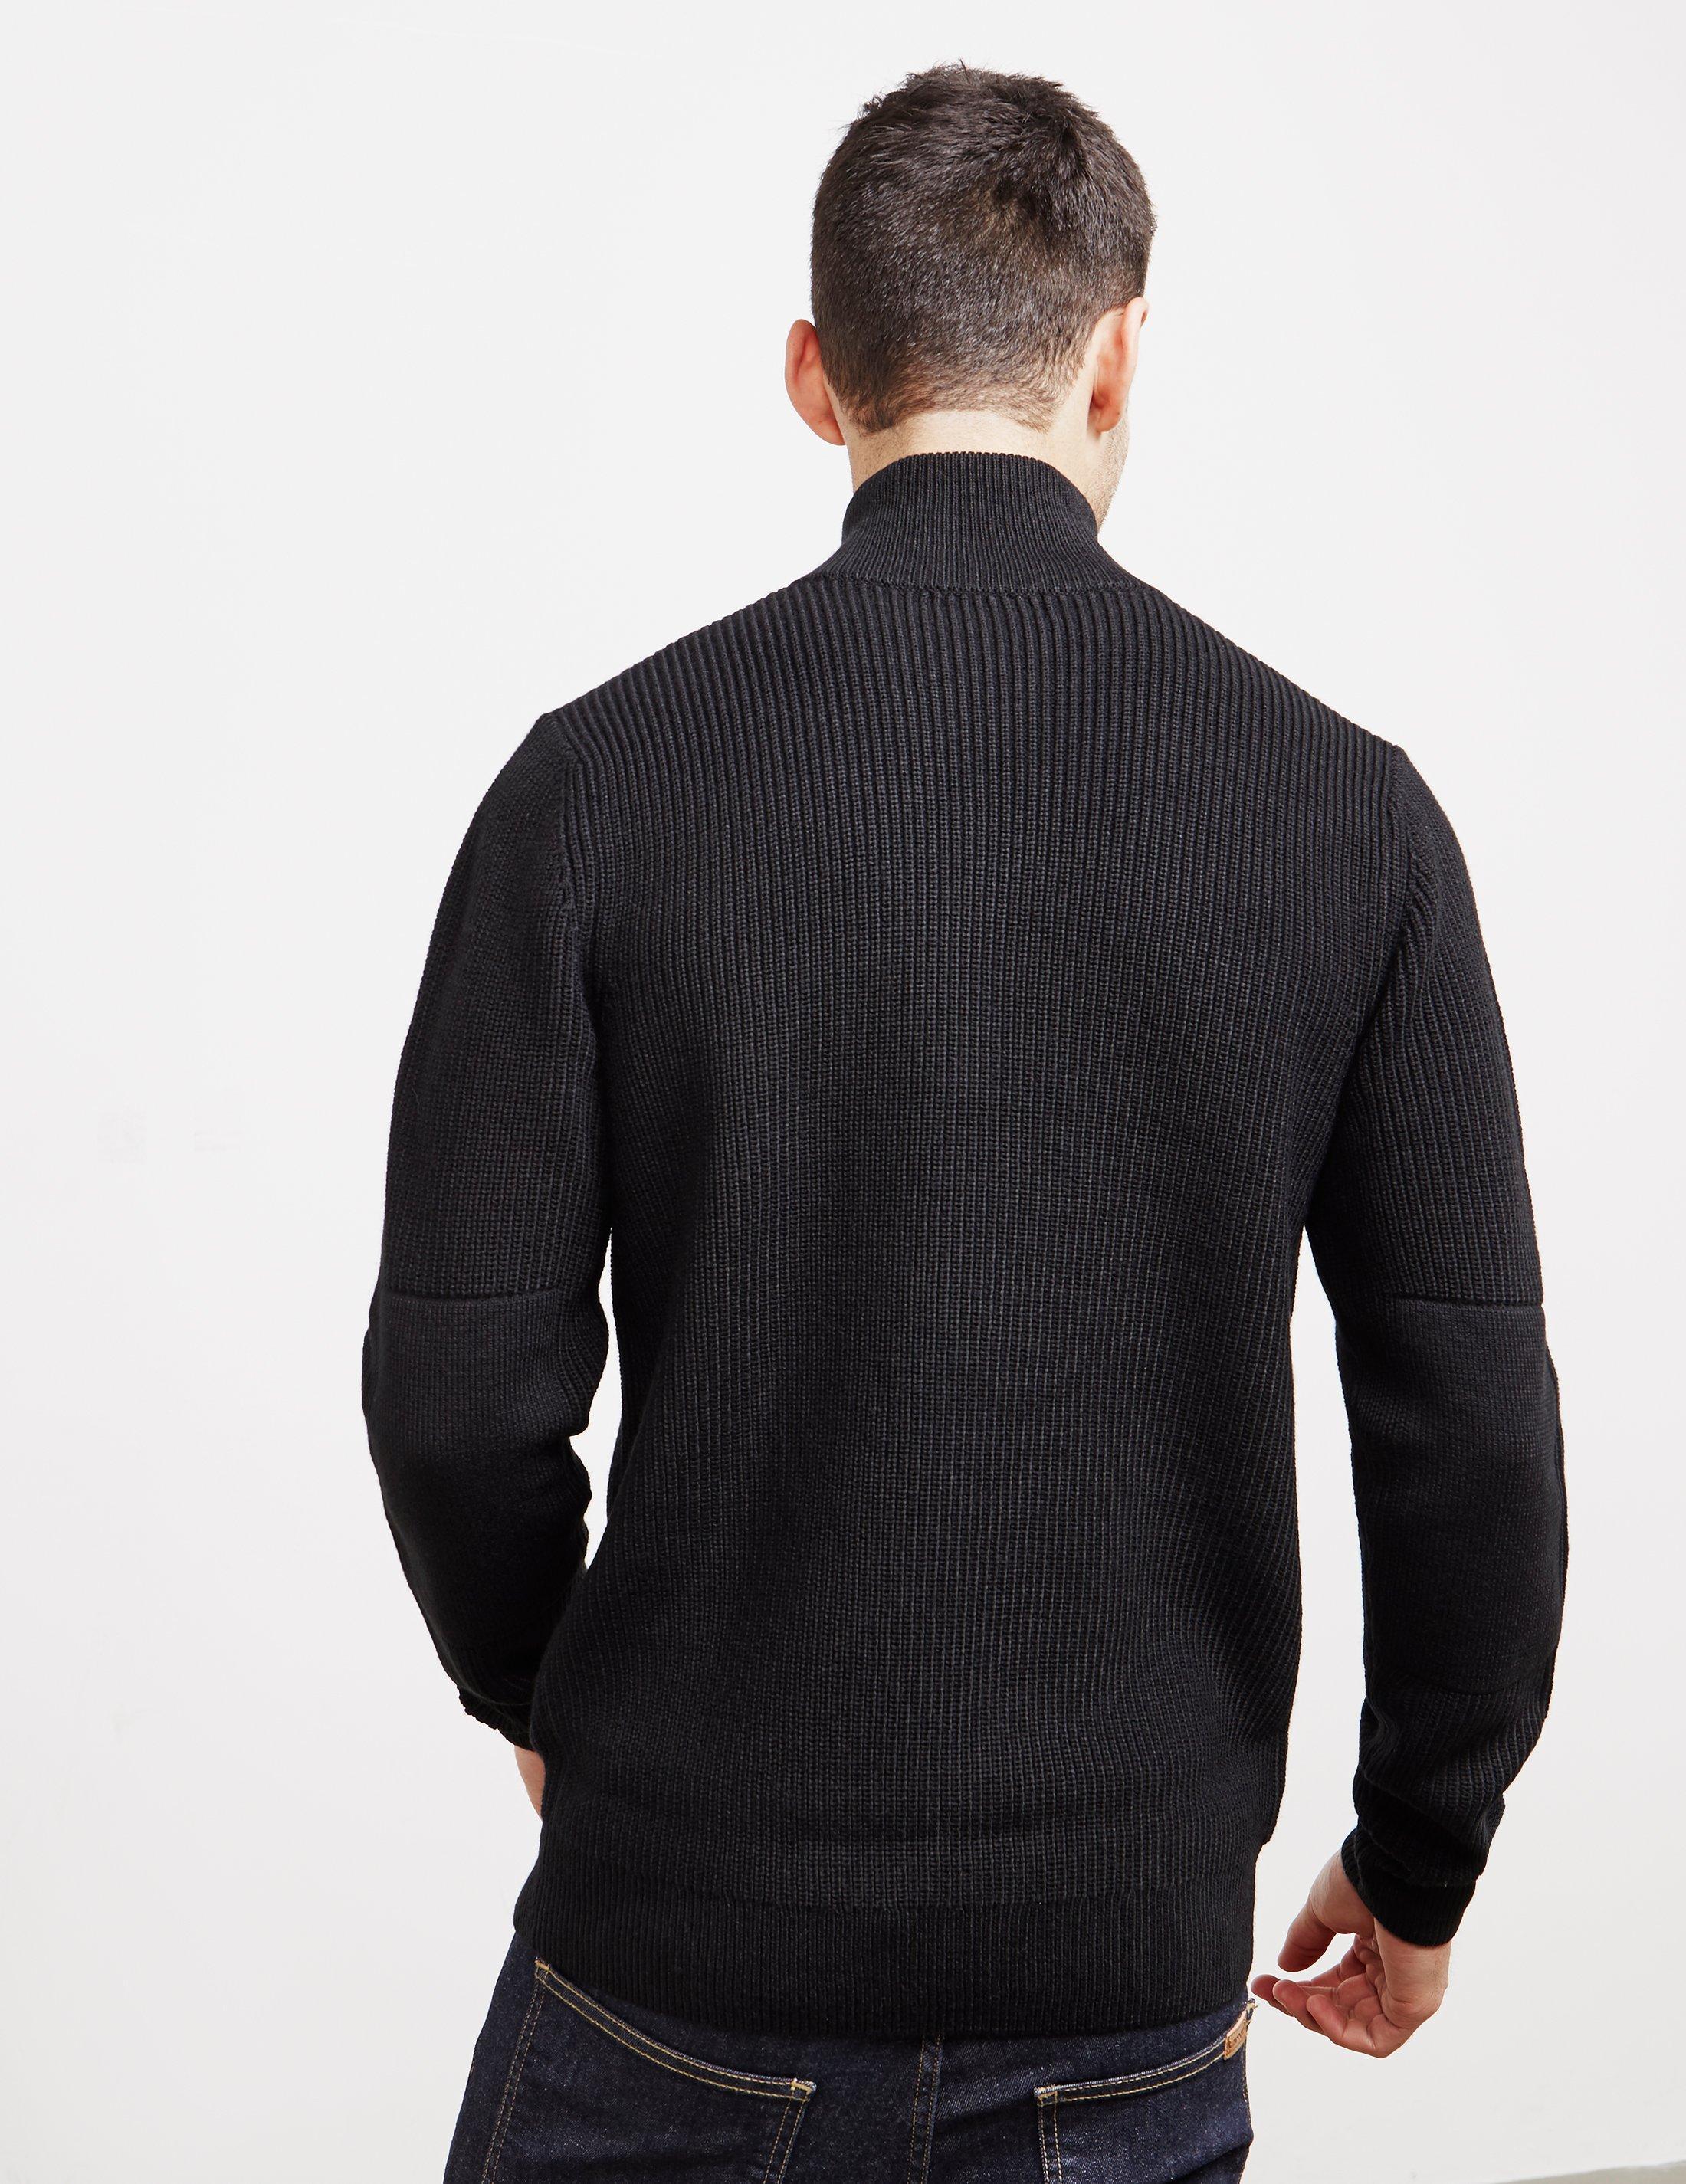 Fred Perry Half Zip Ribbed Knit Jumper Black in Black for Men - Lyst